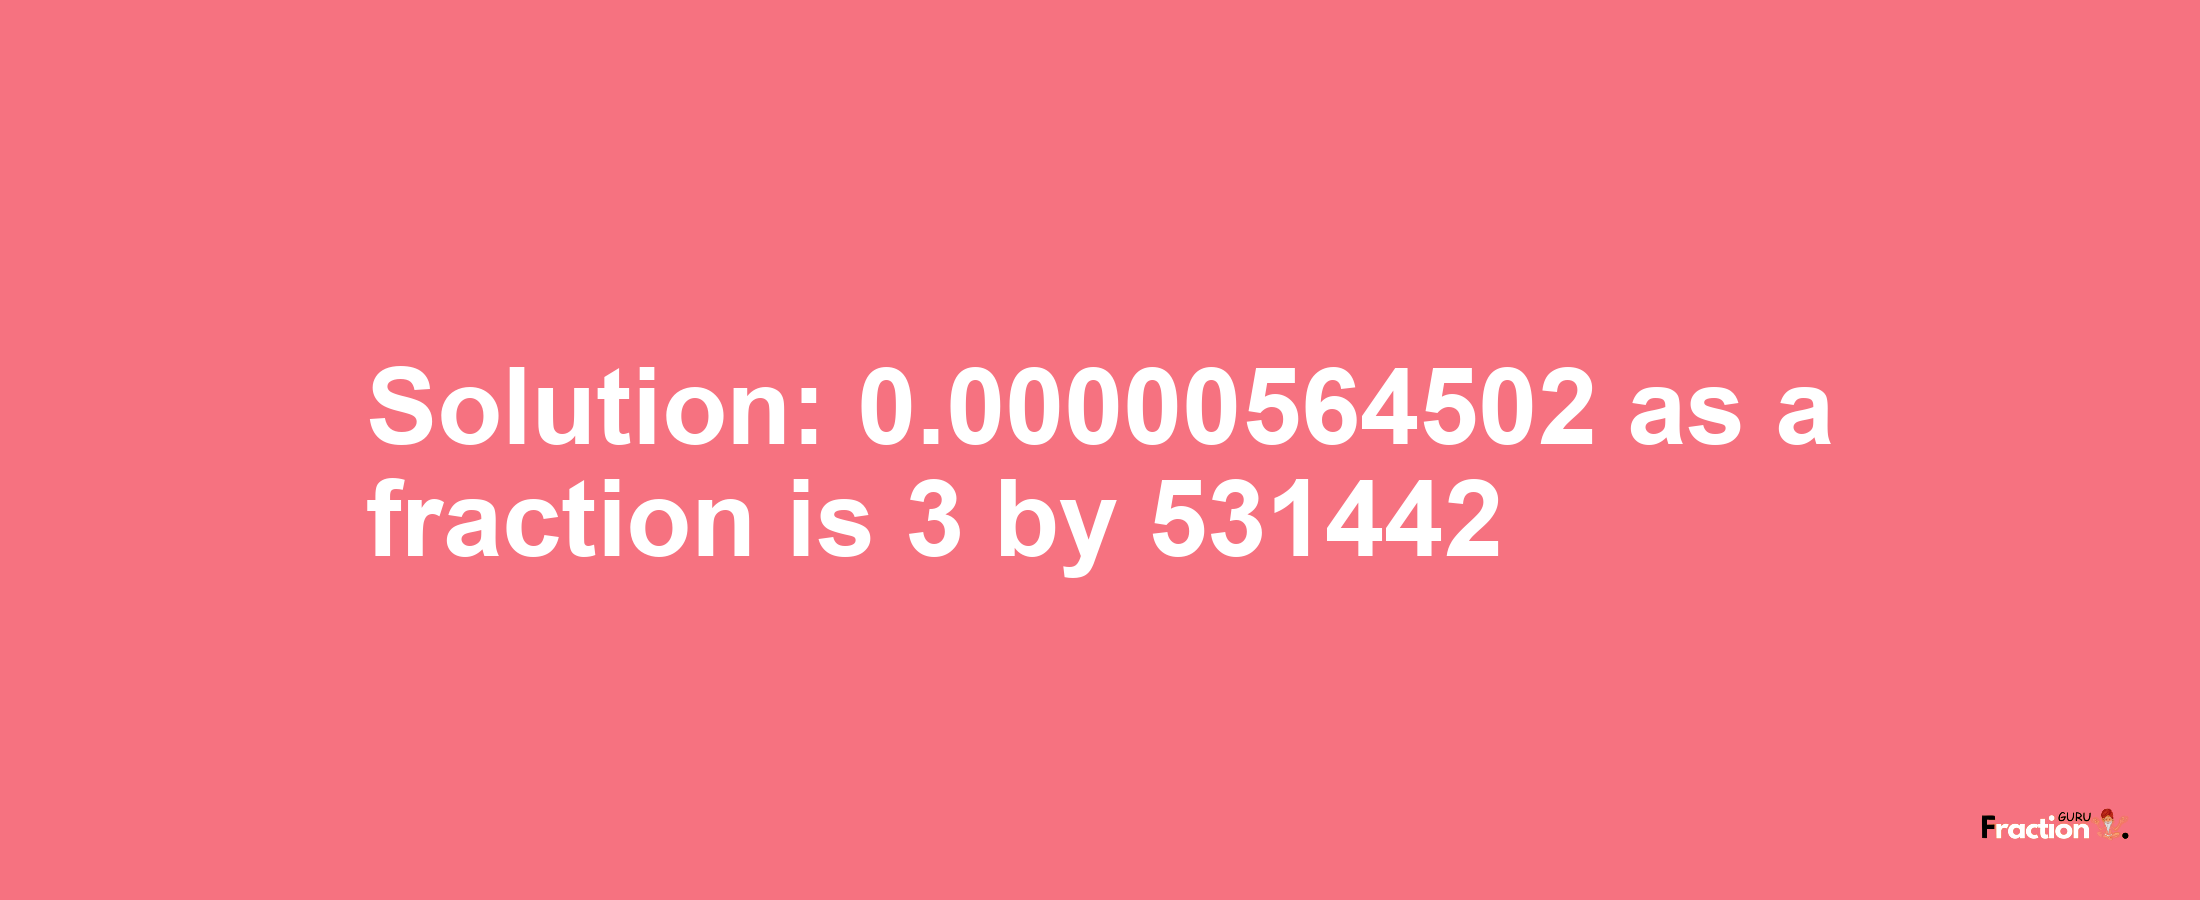 Solution:0.00000564502 as a fraction is 3/531442